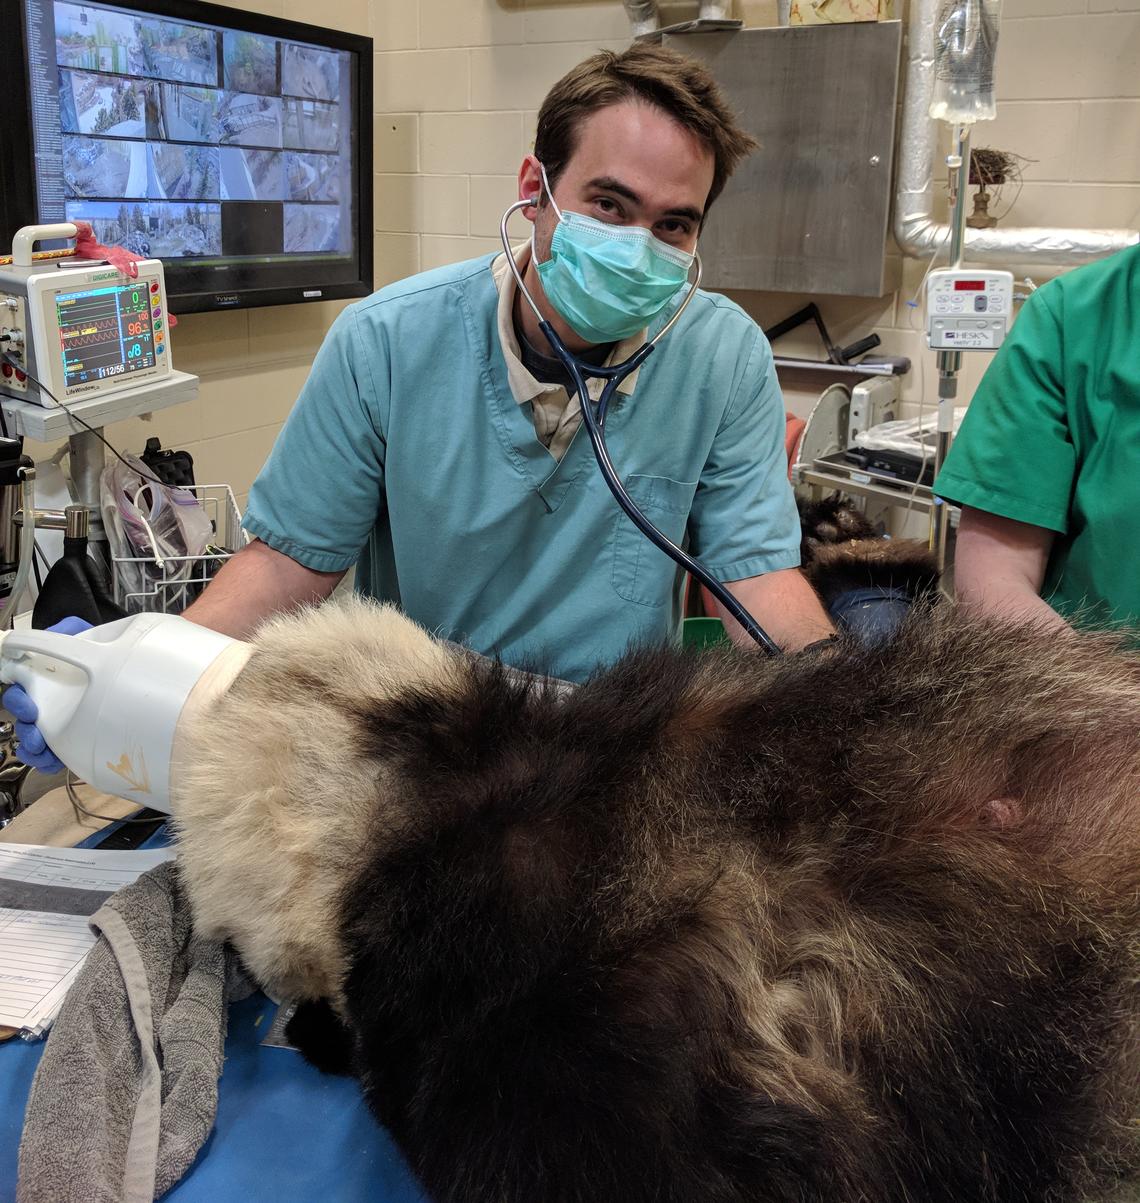 Jeff Lees, a fourth-year UCVM student on practicum rotation at the Calgary Zoo, had the opportunity to help monitor anesthesia on the panda and do a physical examination of her.